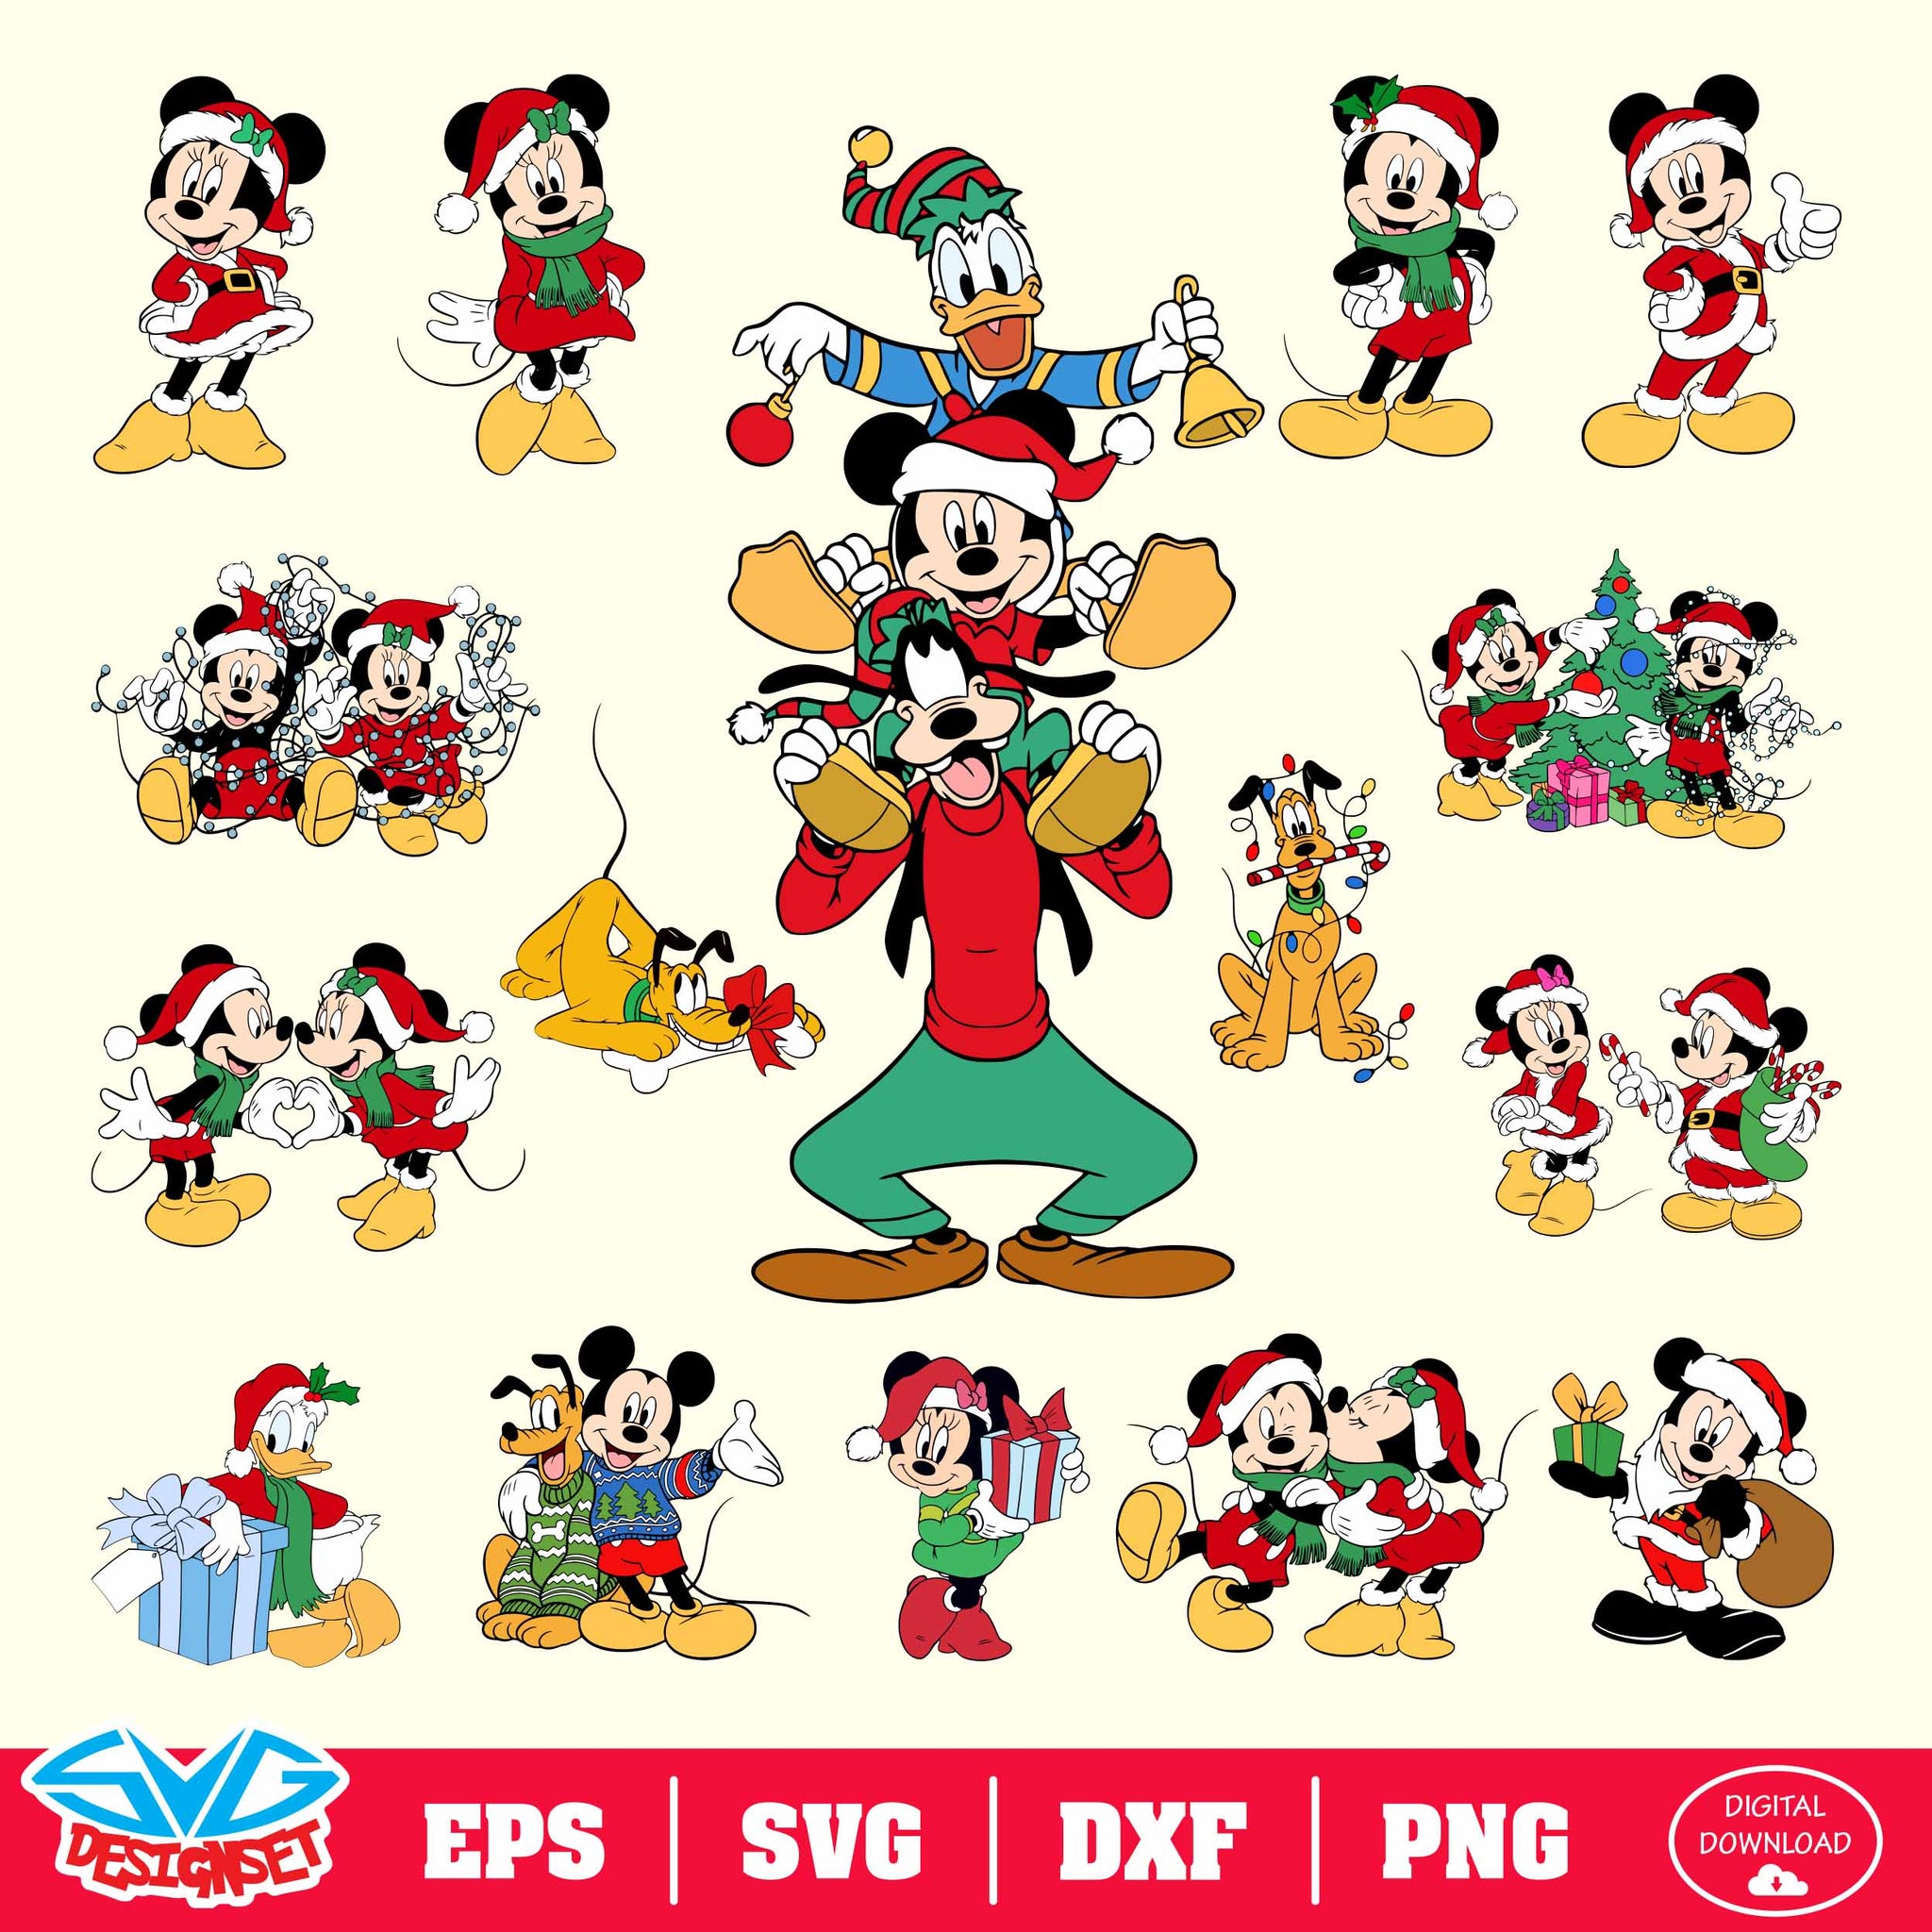 Disney Christmas Bundle Svg, Dxf, Eps, Png, Clipart, Silhouette and Cutfiles #001 - SVGDesignSets